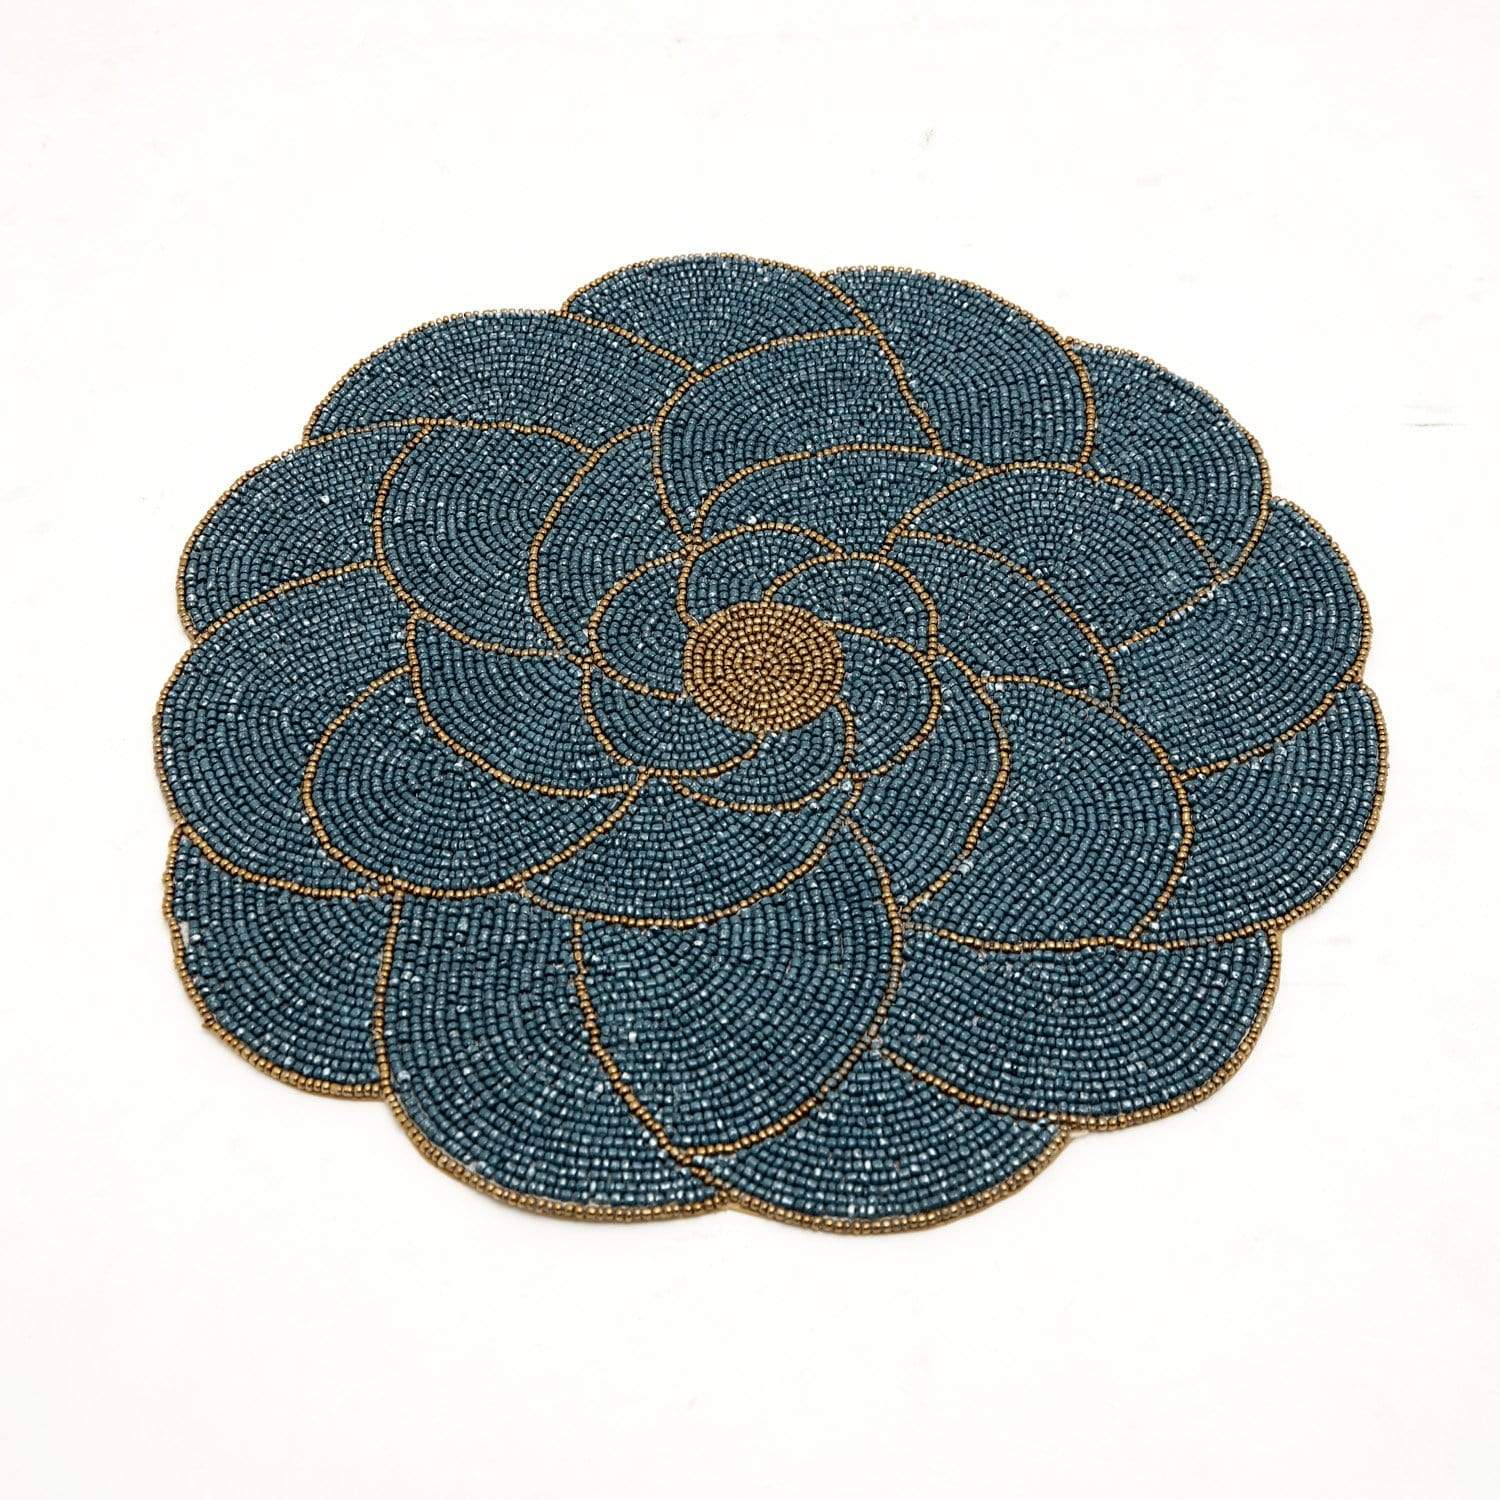 ARVIND DAISY GLS BEADED PLACEMAT TEAL BLU/GLD 36X36 - PM172177